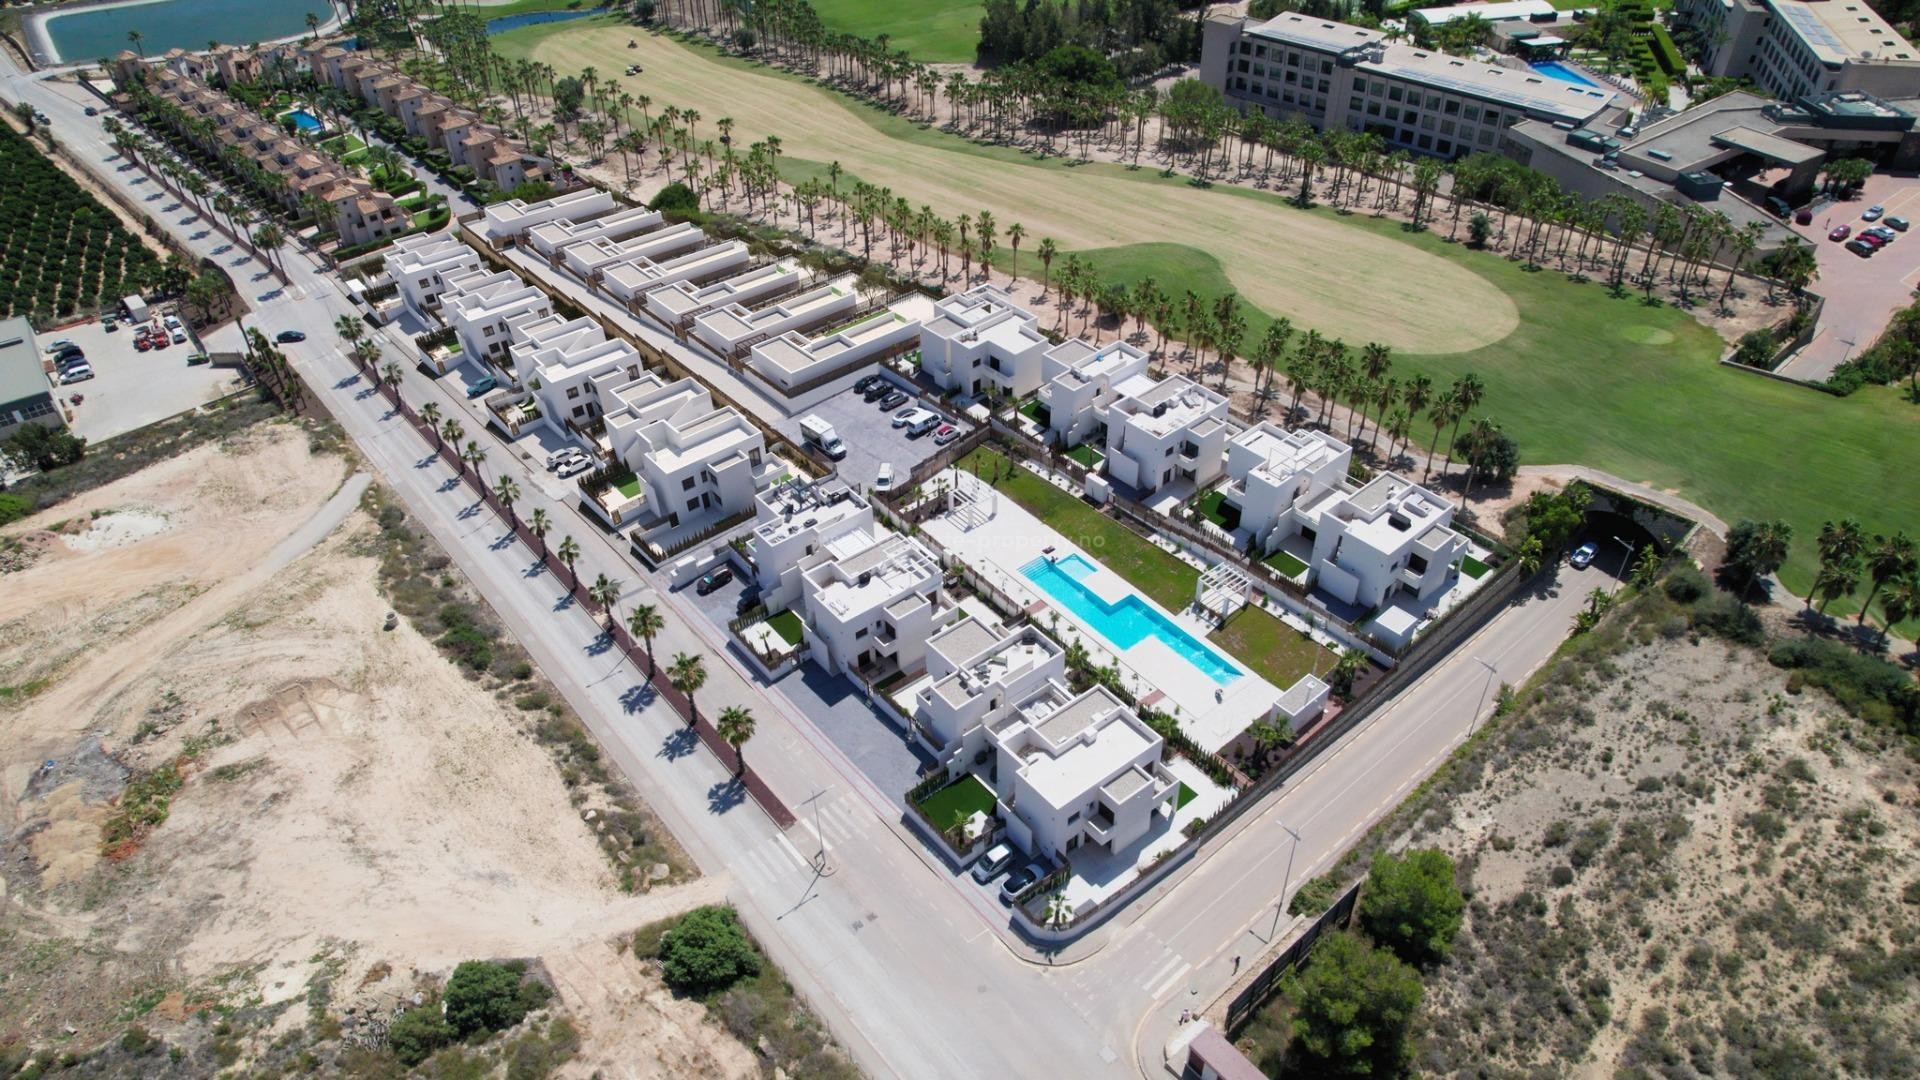 New bungalows/apartments in La Finca Golf, 3 bedrooms (one bedroom with solarium) 2 bathrooms, living/dining room with direct access to spacious terraces. Landscaped garden